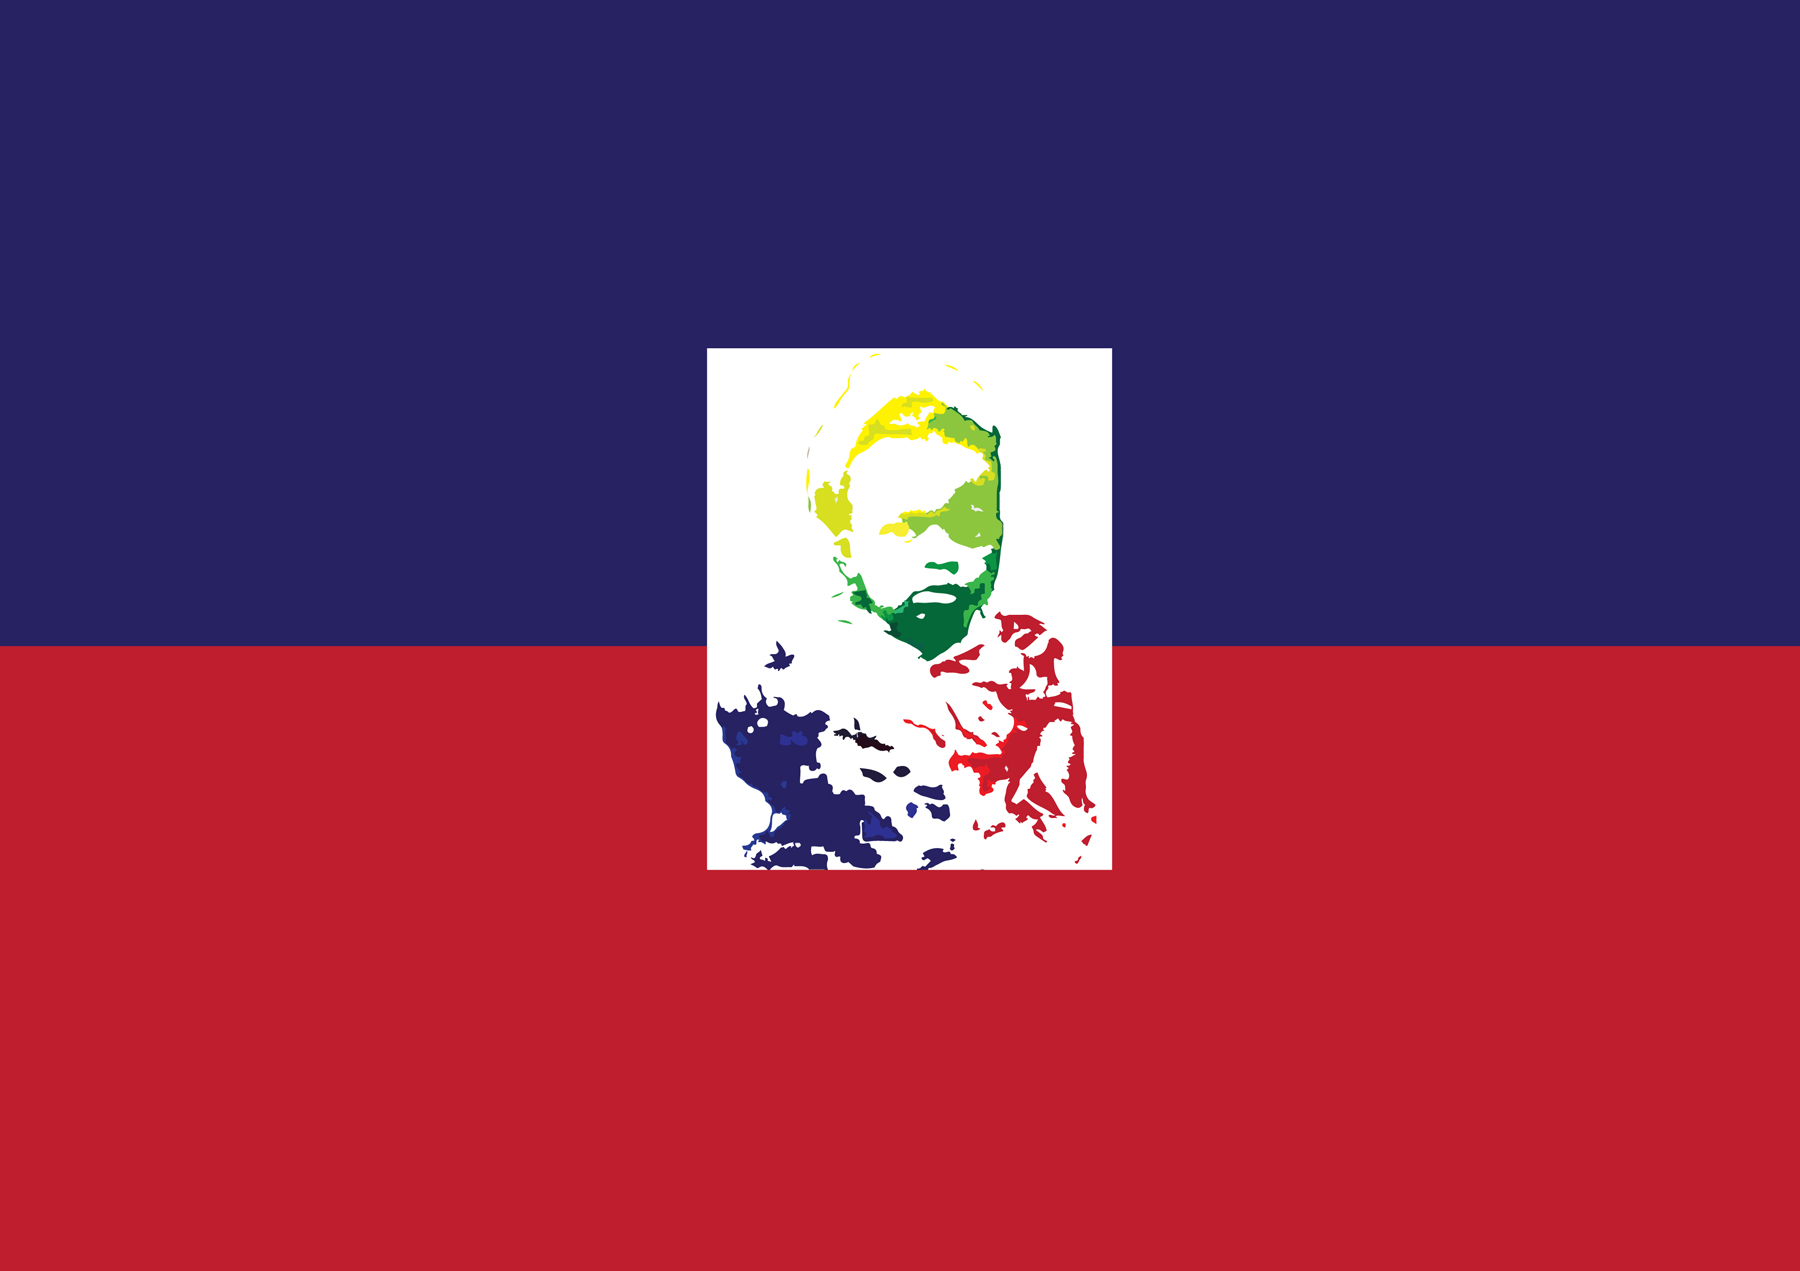 Rectangular, flag-like design that is navy blue on top and red on bottom with a multicolored image of a young boy in the center